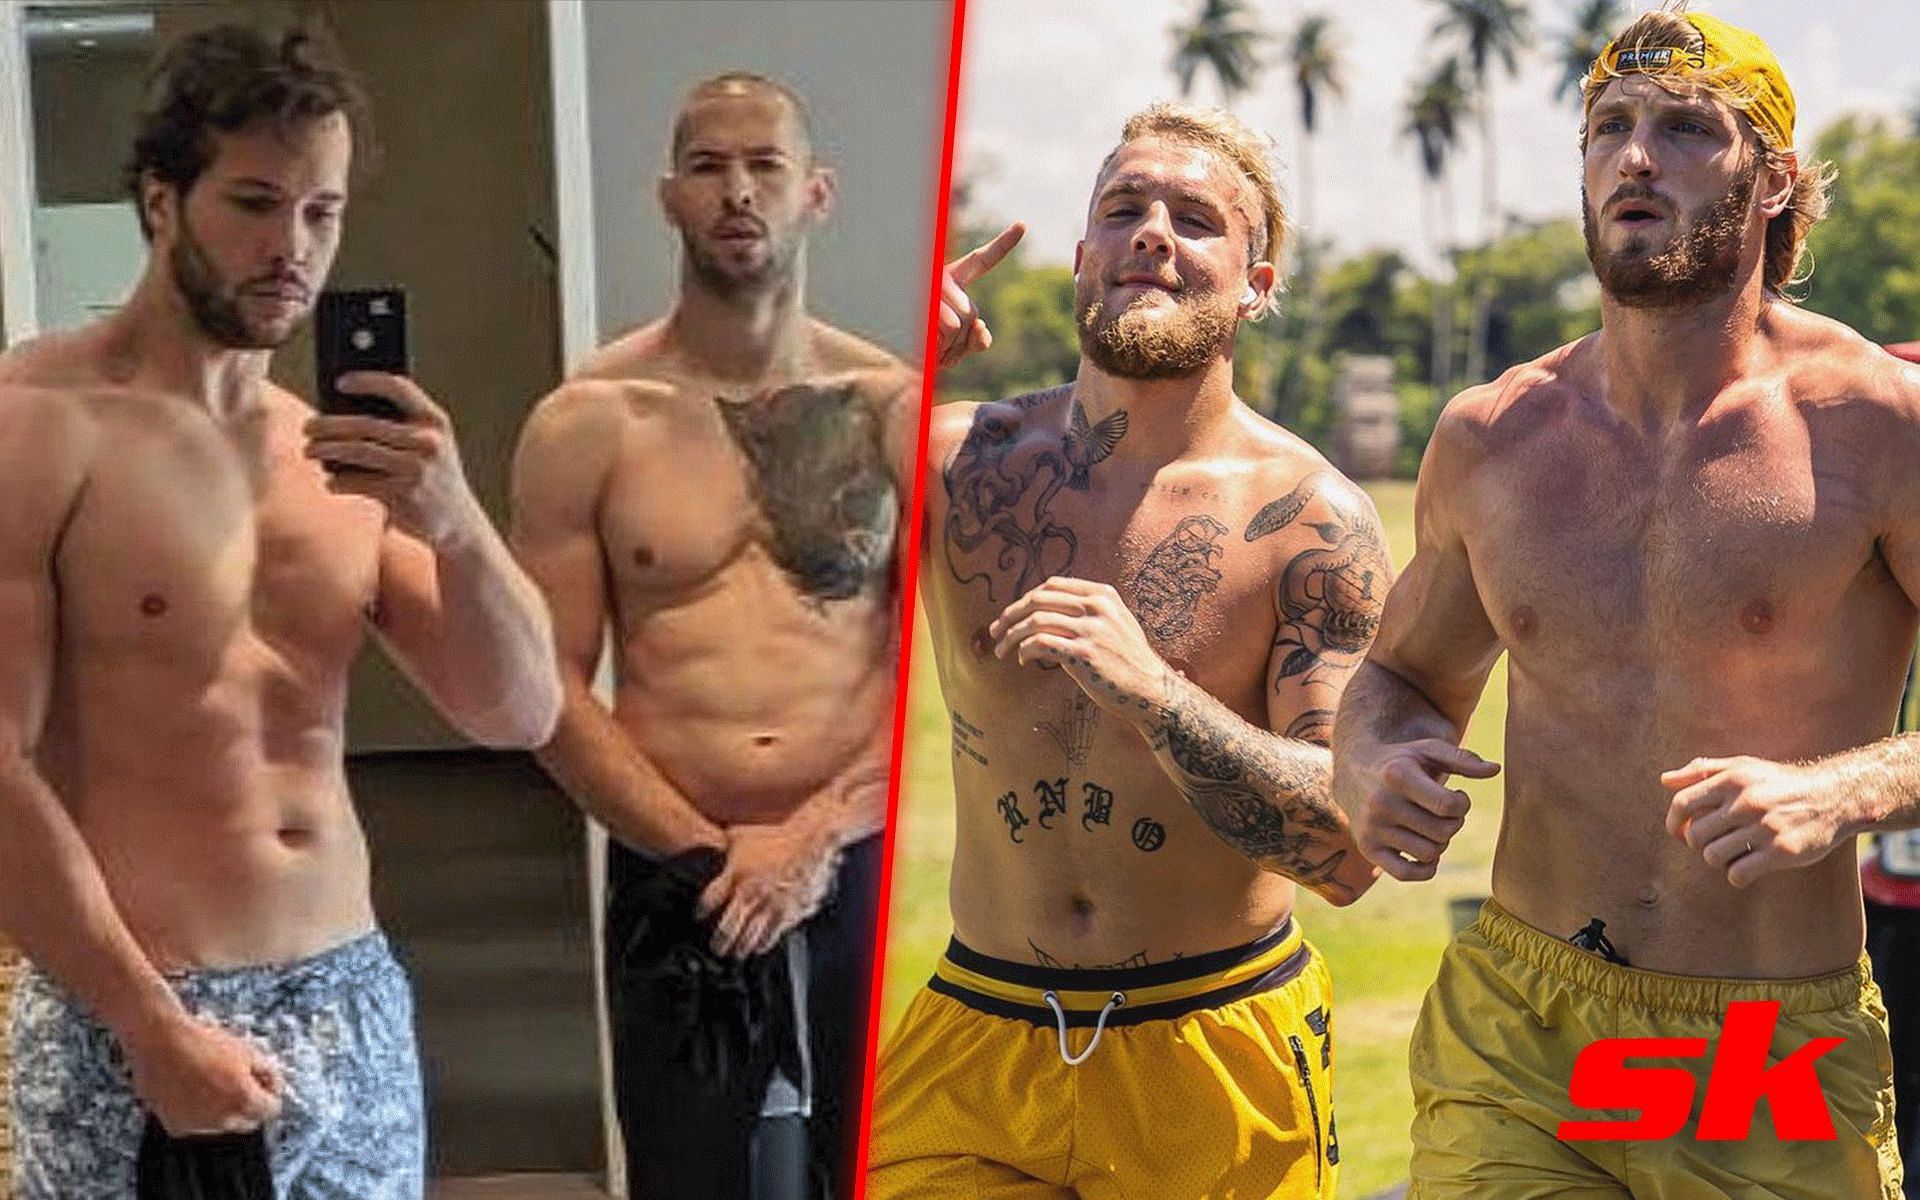 Jake Paul ad Logan Paul weigh in on a fight against the Tate brothers [Image credits: @talismantate and @loganpaul on instagram]